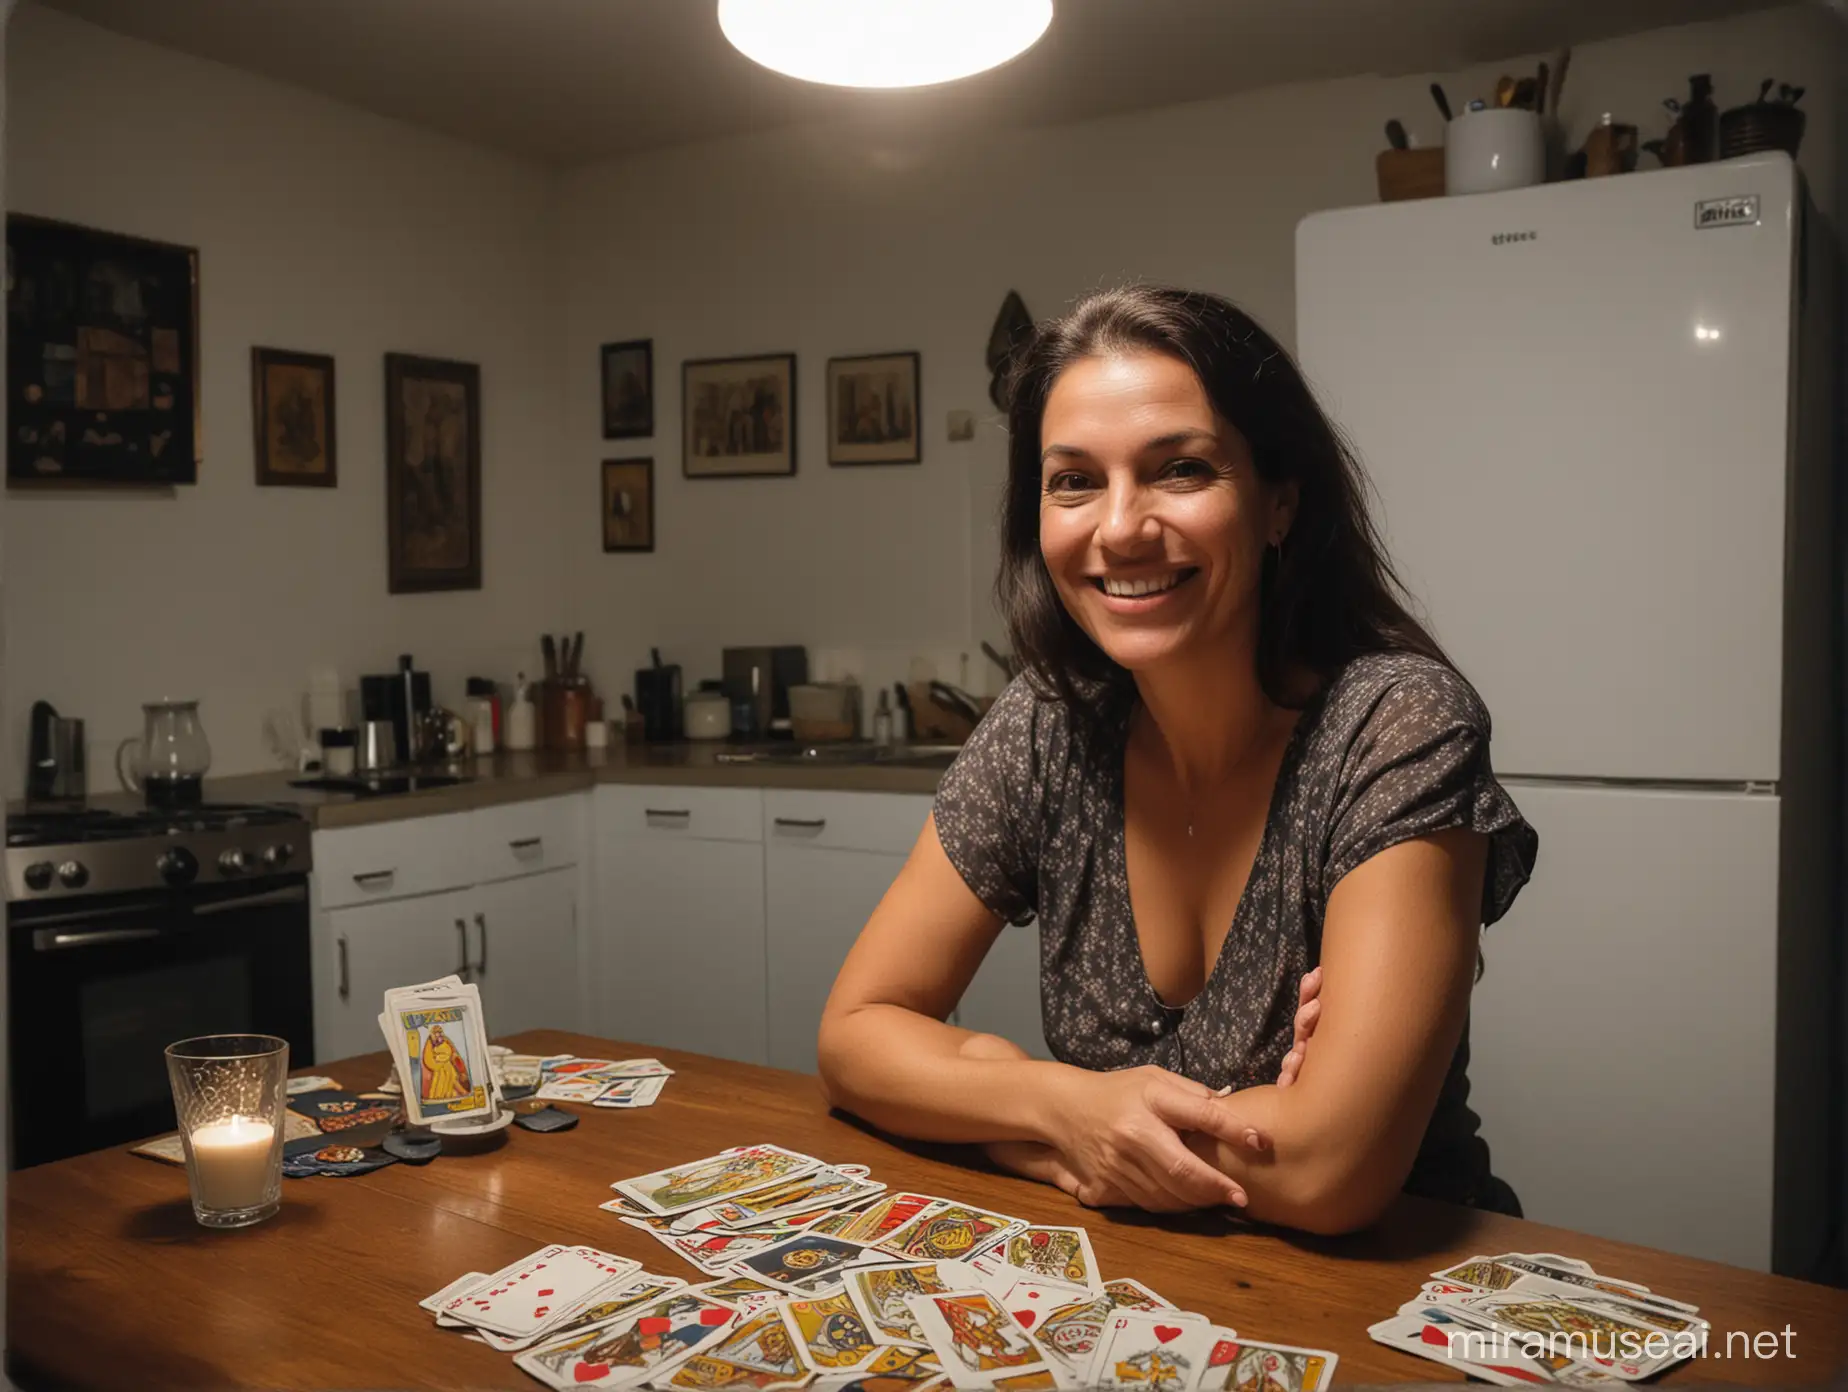 MiddleAged Brazilian Woman Smiling and Playing Tarot Cards in Simple Kitchen at Night